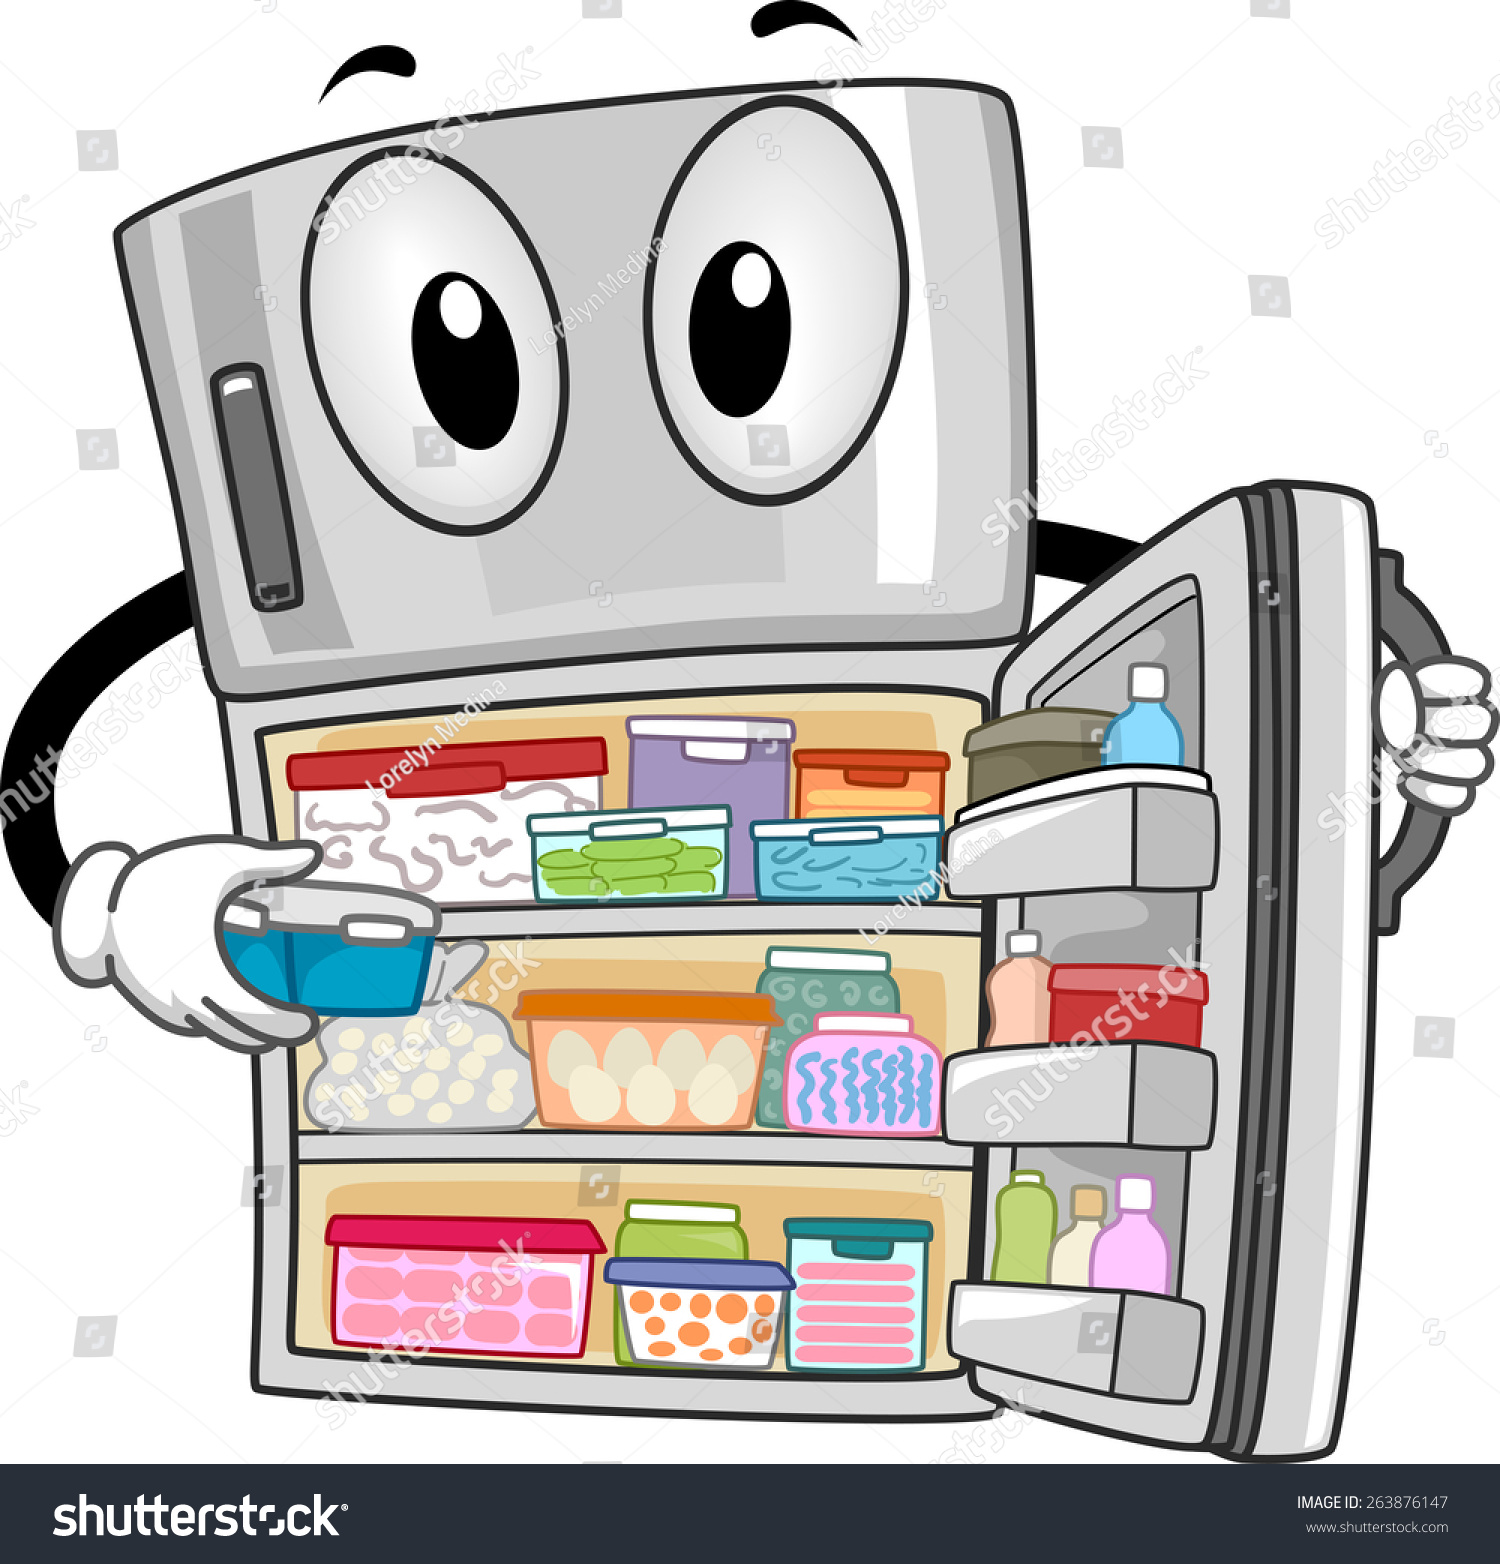 Mascot Illustration Of A Fully-Stocked Refrigerator Showing Its ...